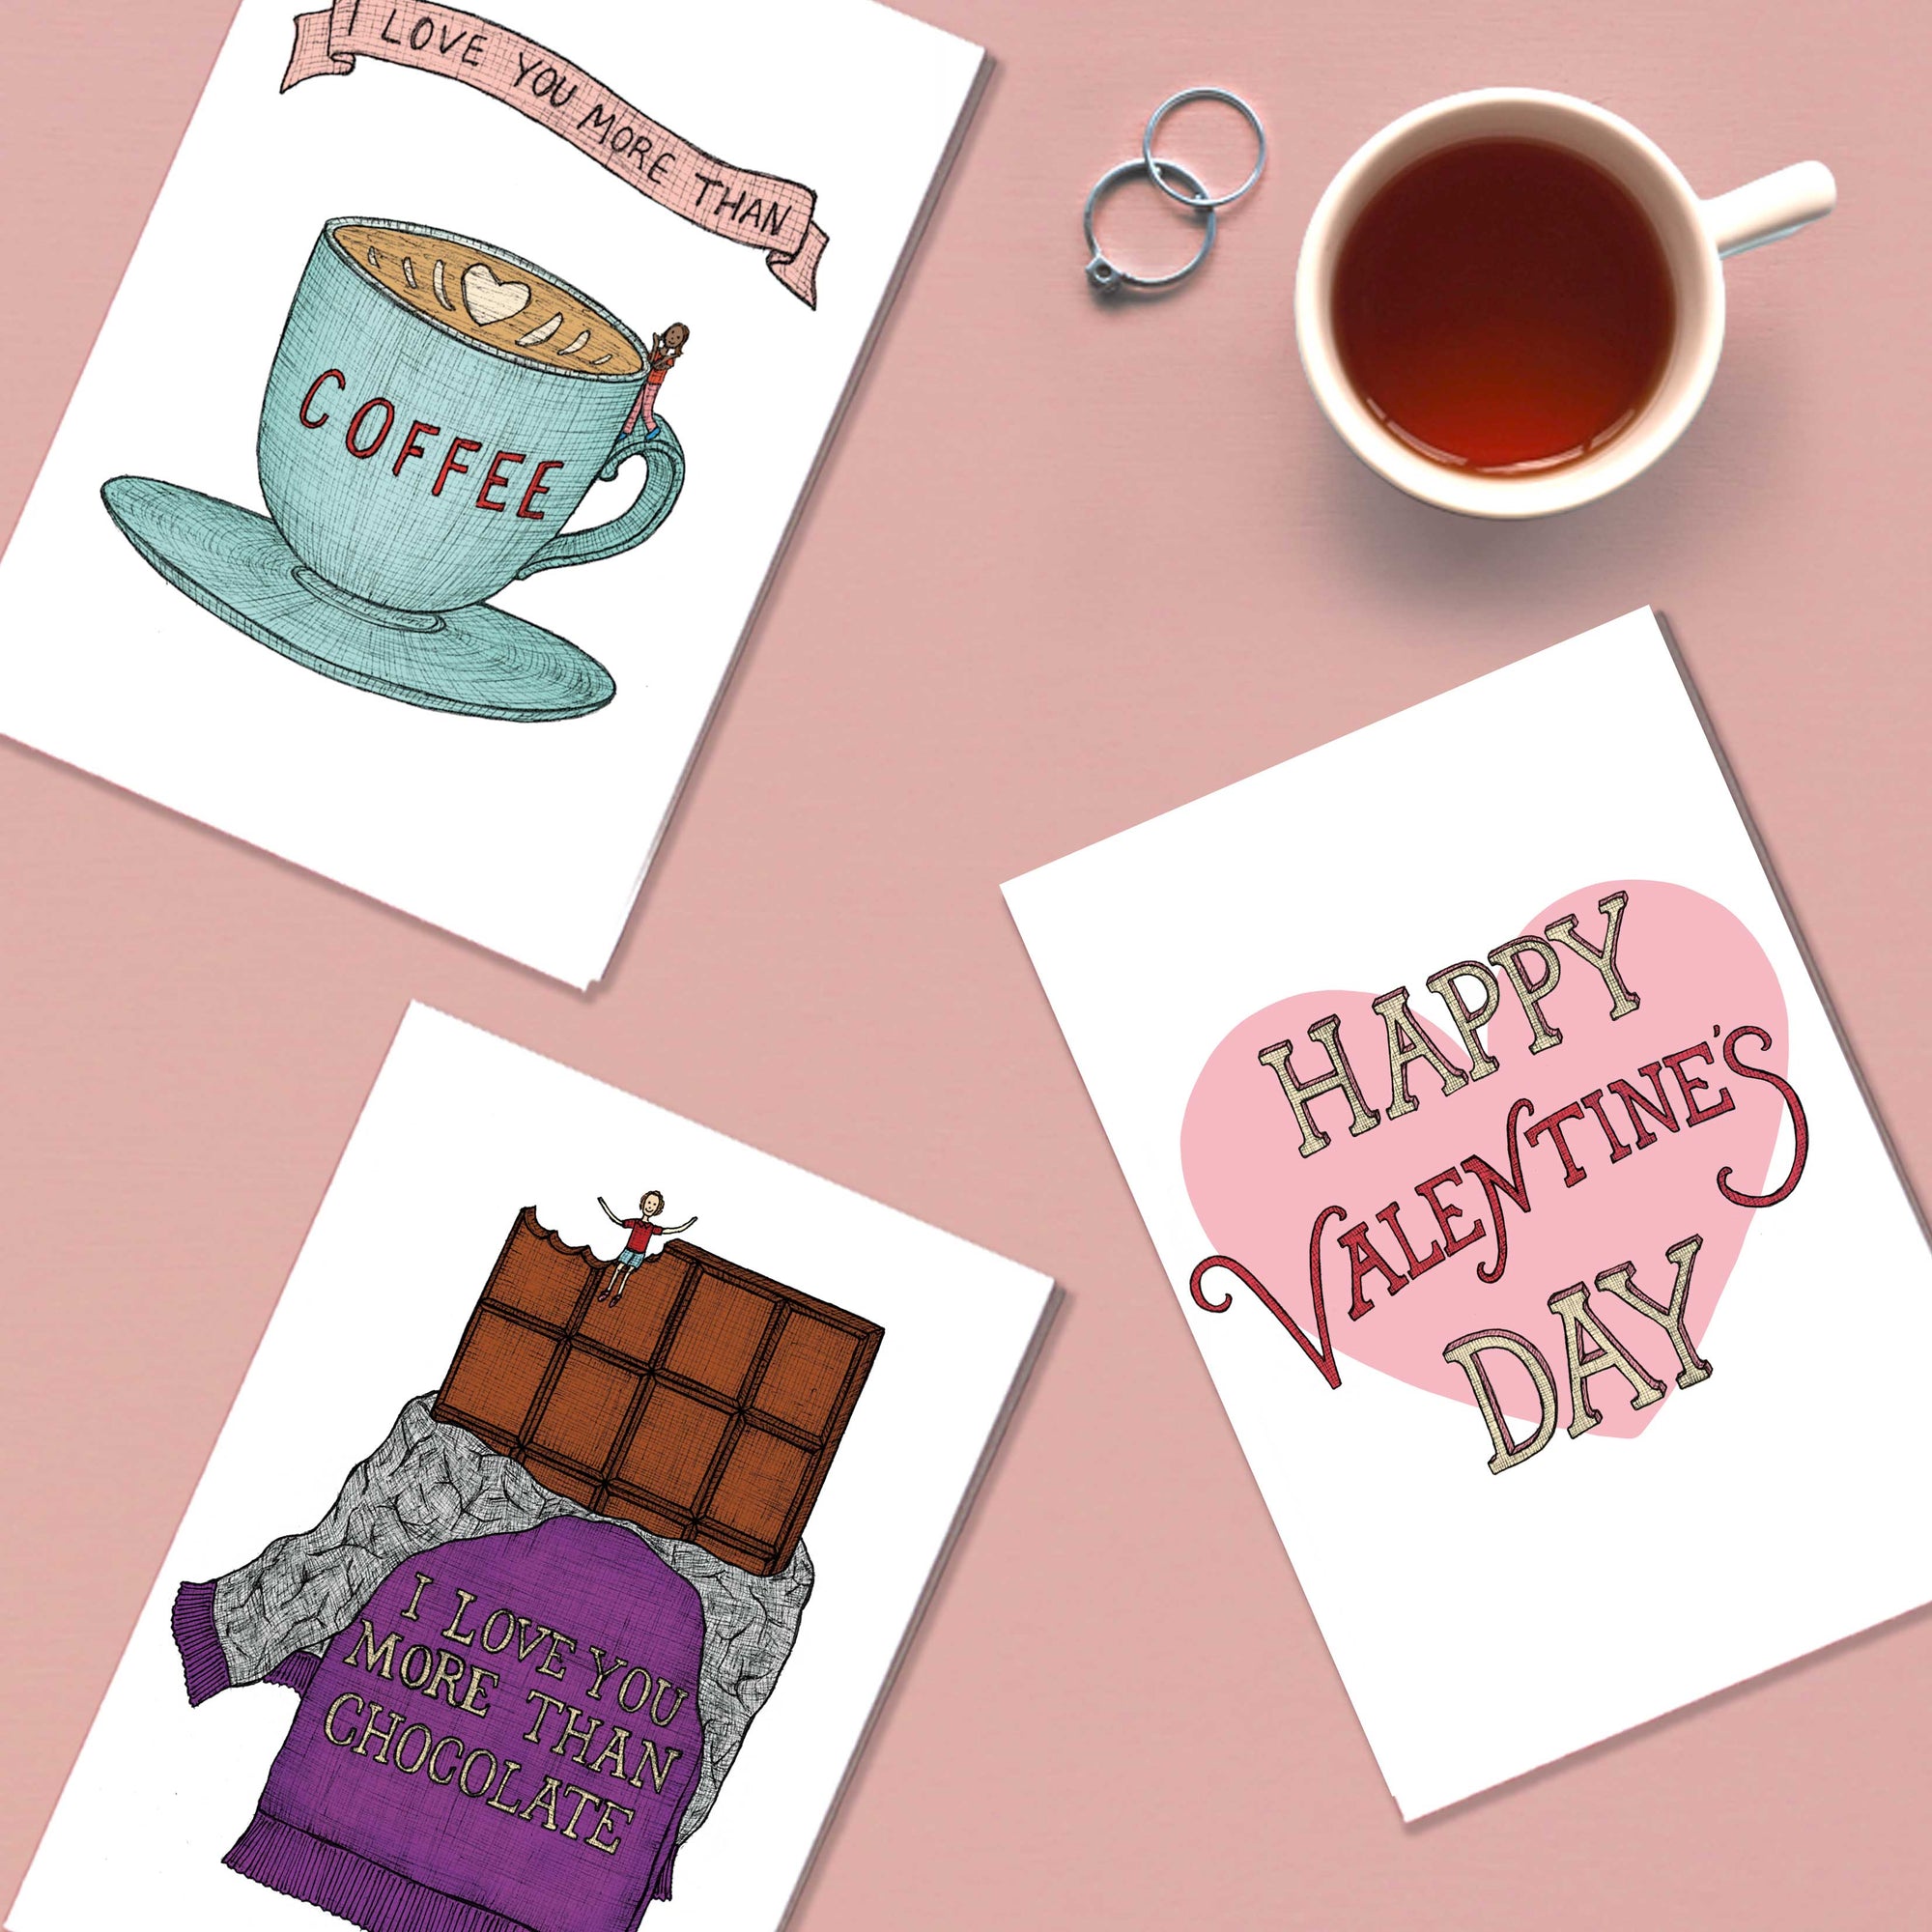 What to write in a Valentines card - 9 ideas